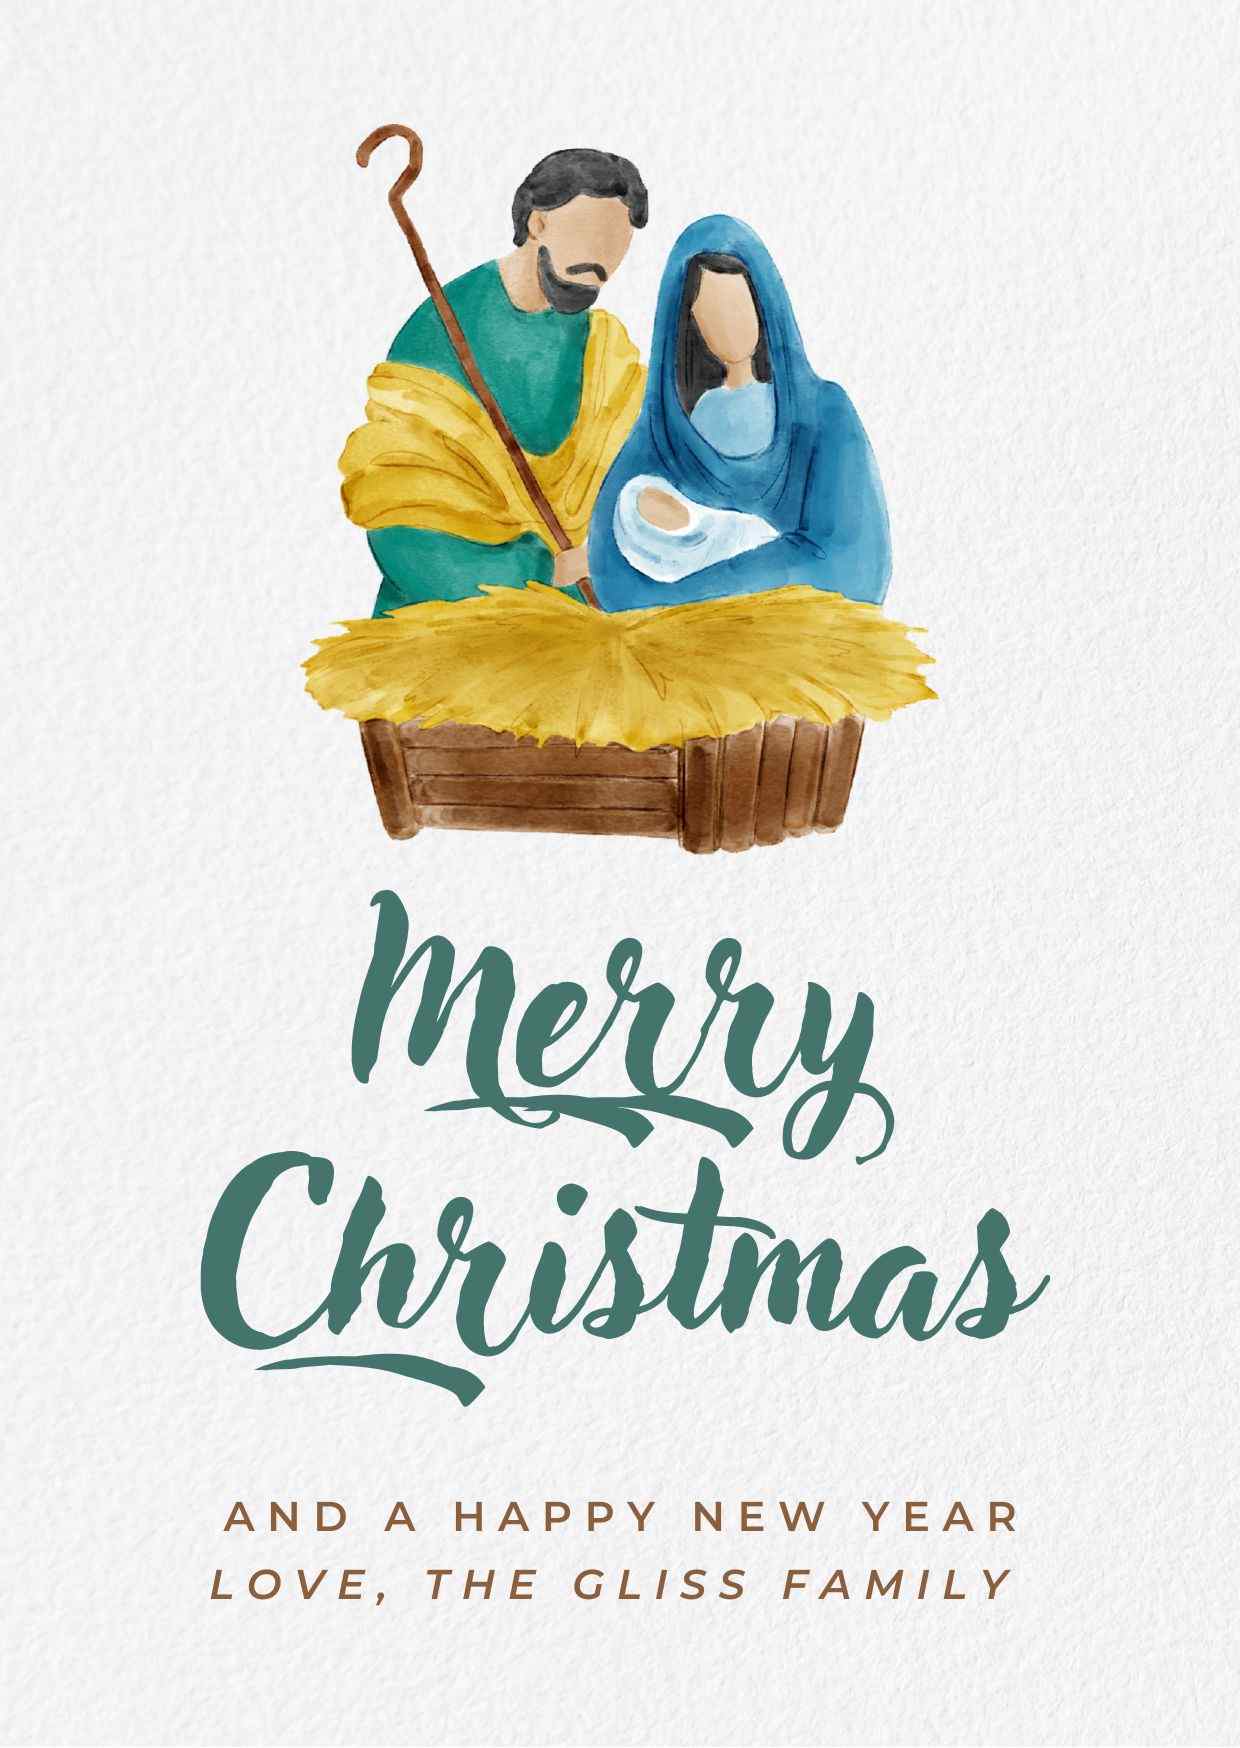 Religious Charity Christmas Cards